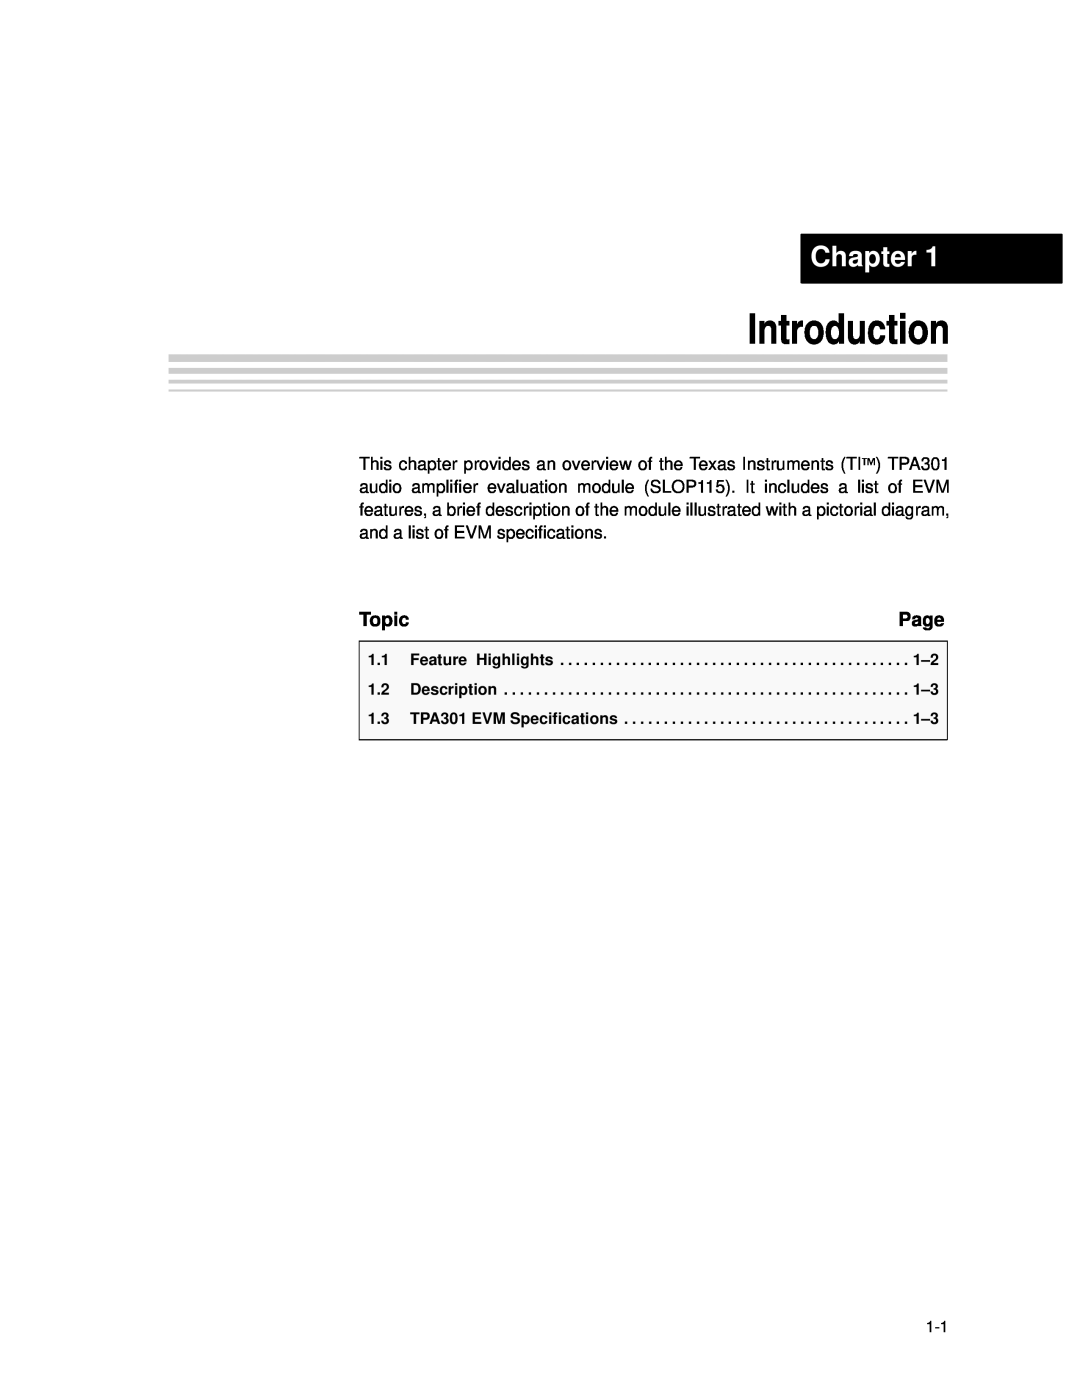 Texas Instruments TPA301 manual Introduction, Chapter, Page, Topic 